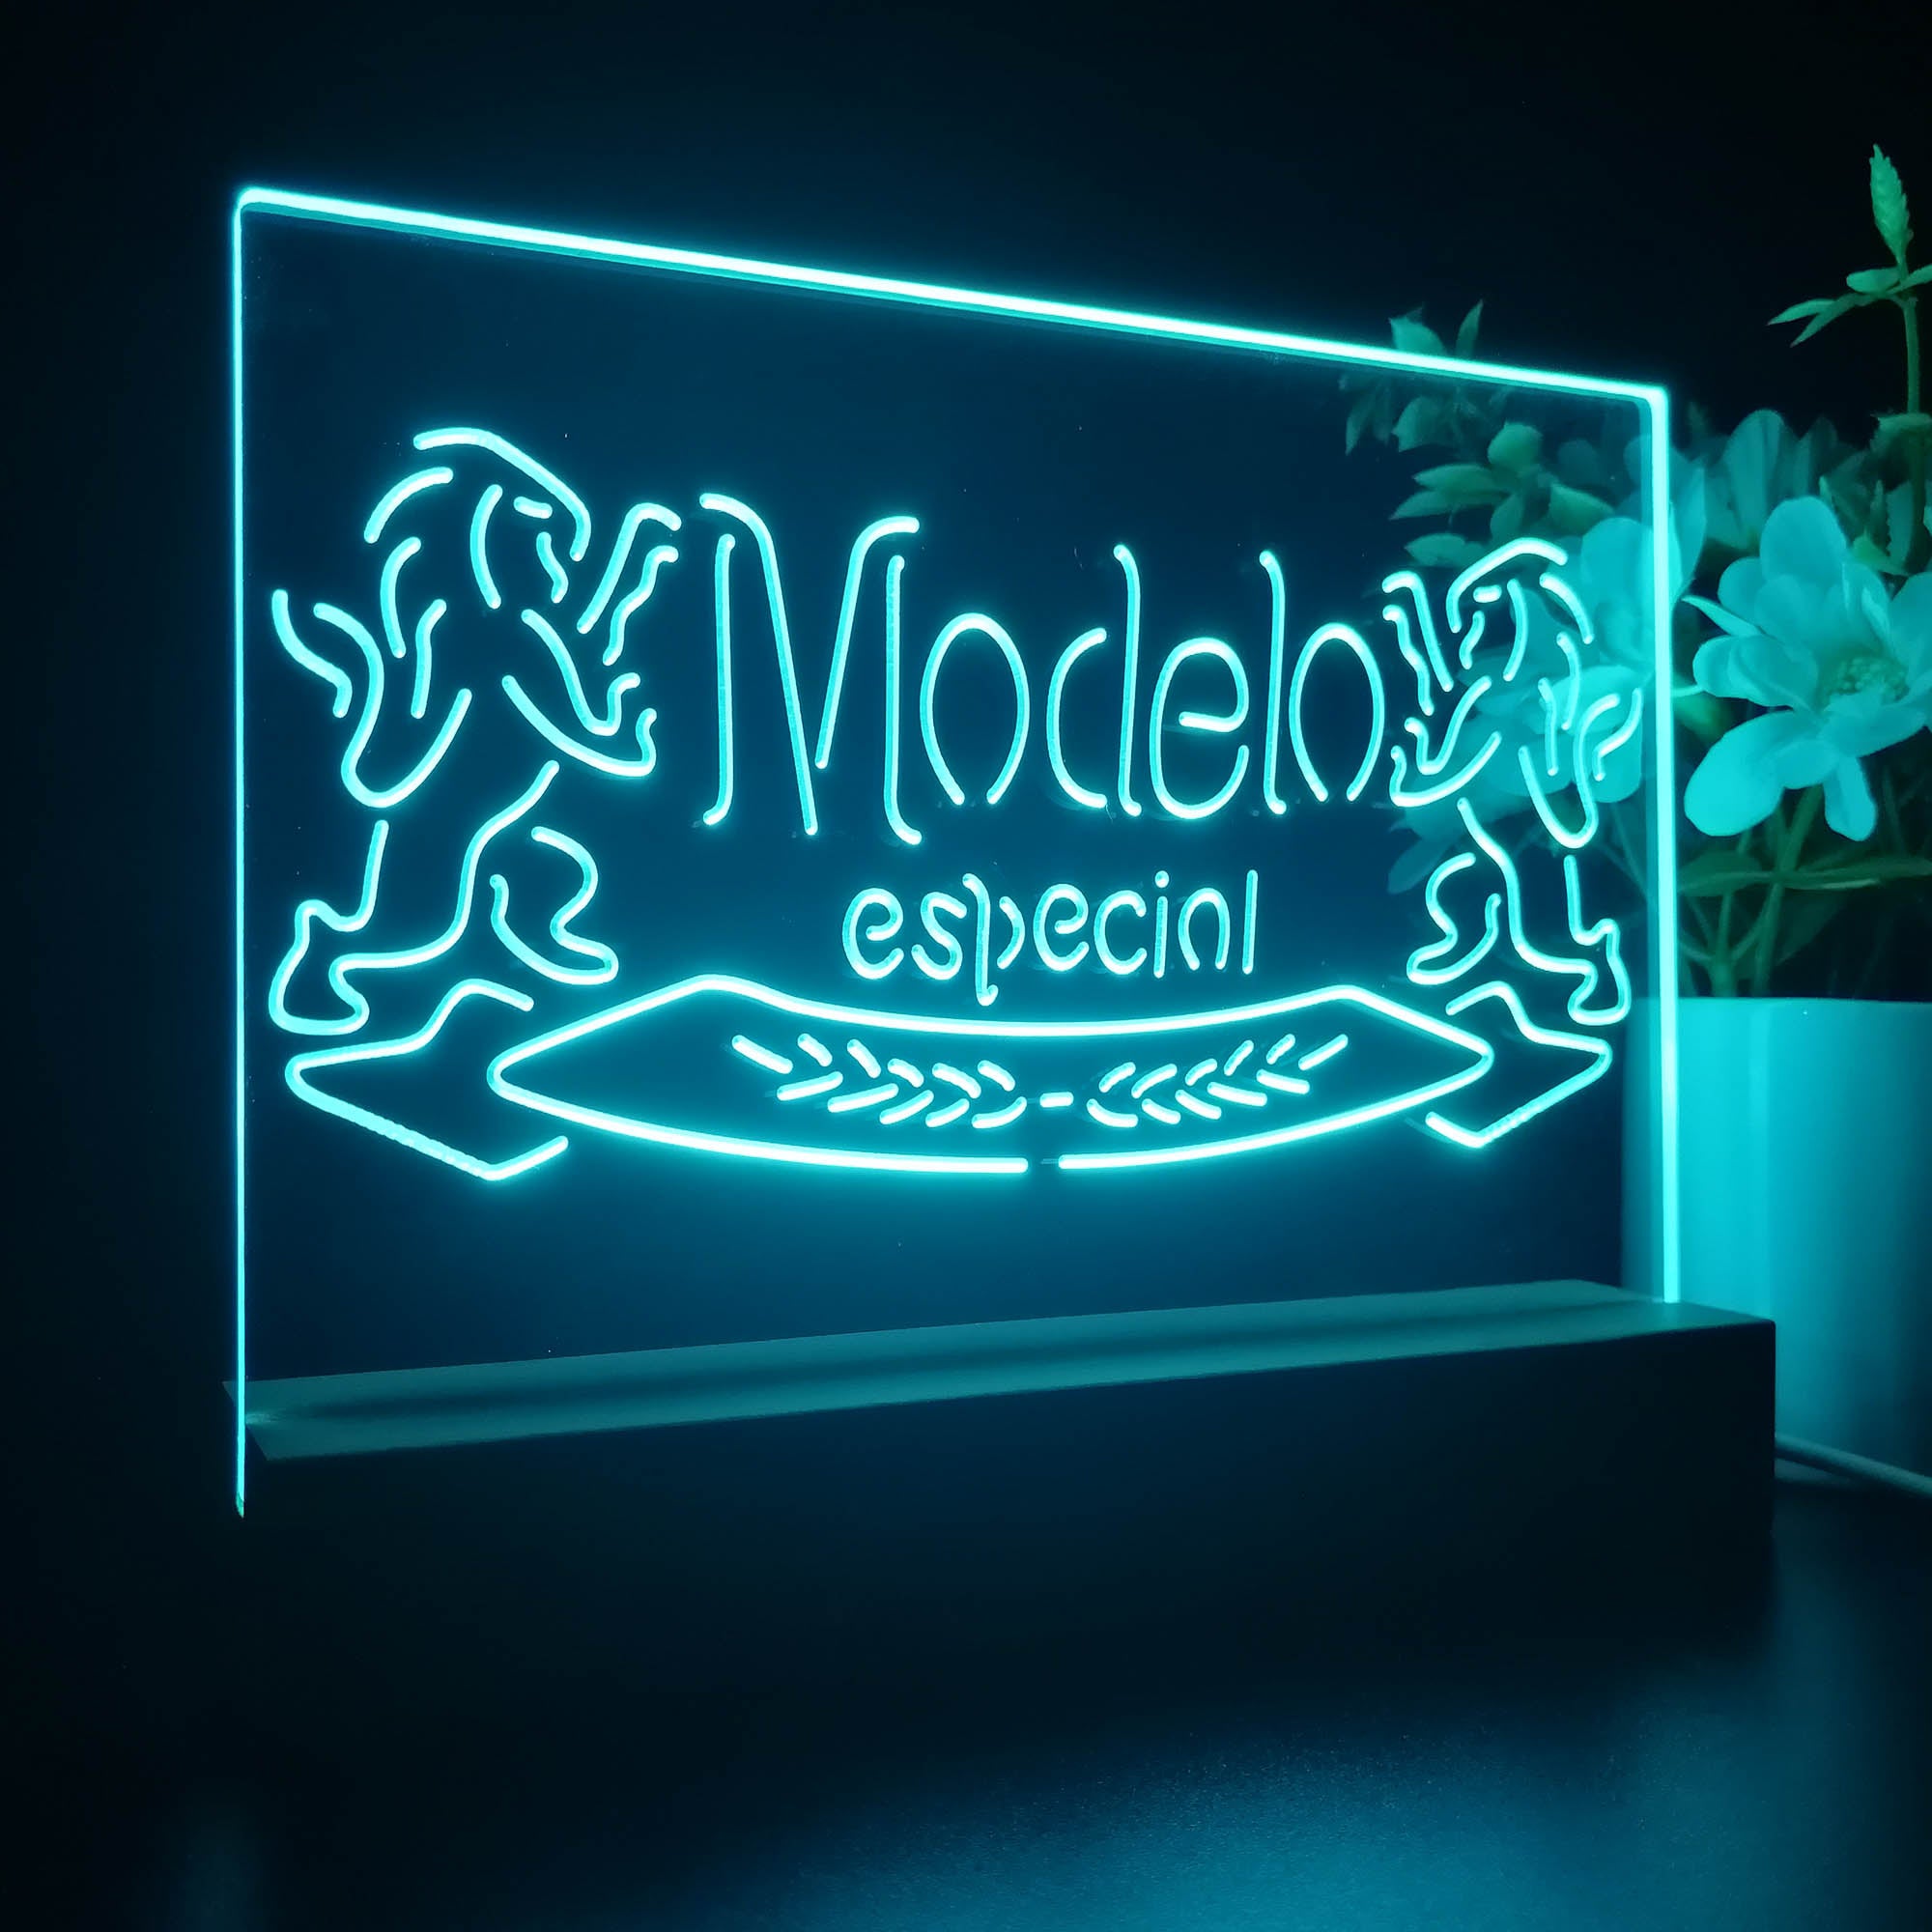 Modelos Especials Beers Lions Night Light LED Sign